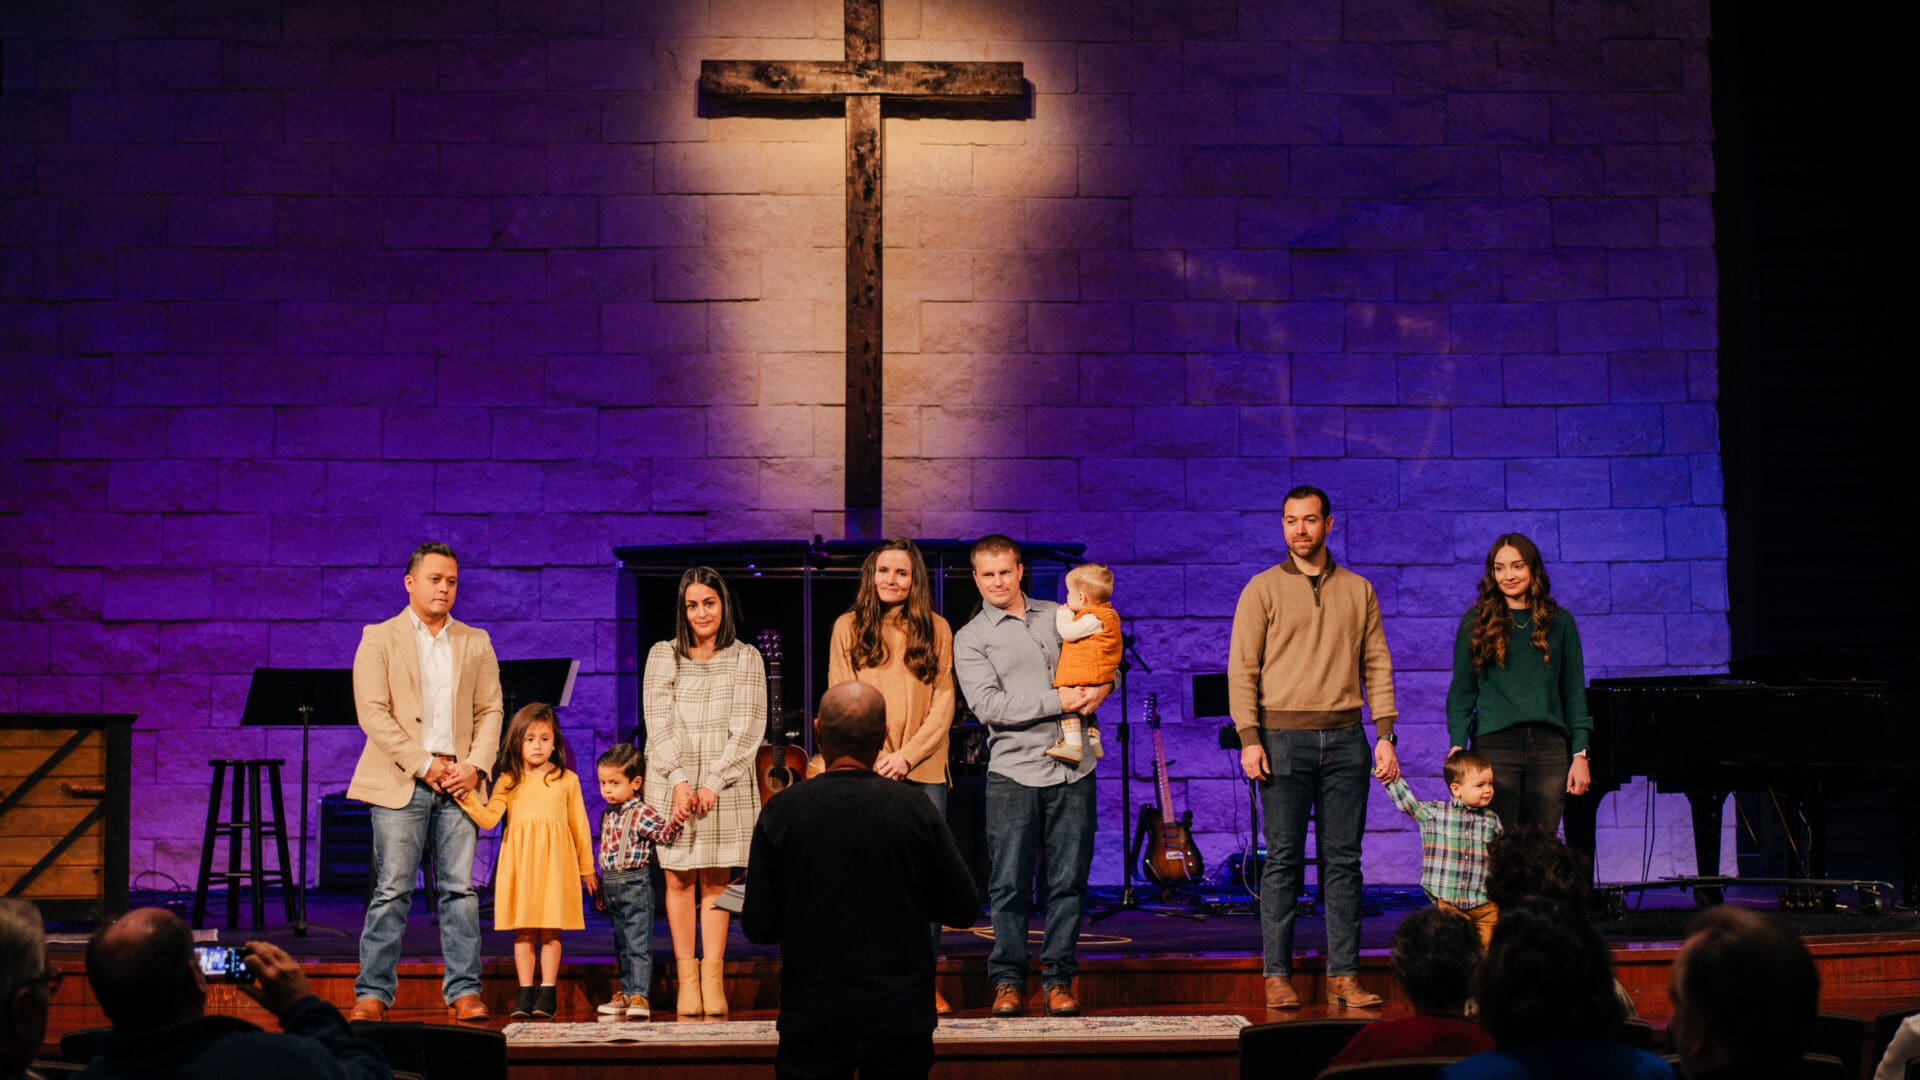 A group of people standing on stage with a cross in the background.